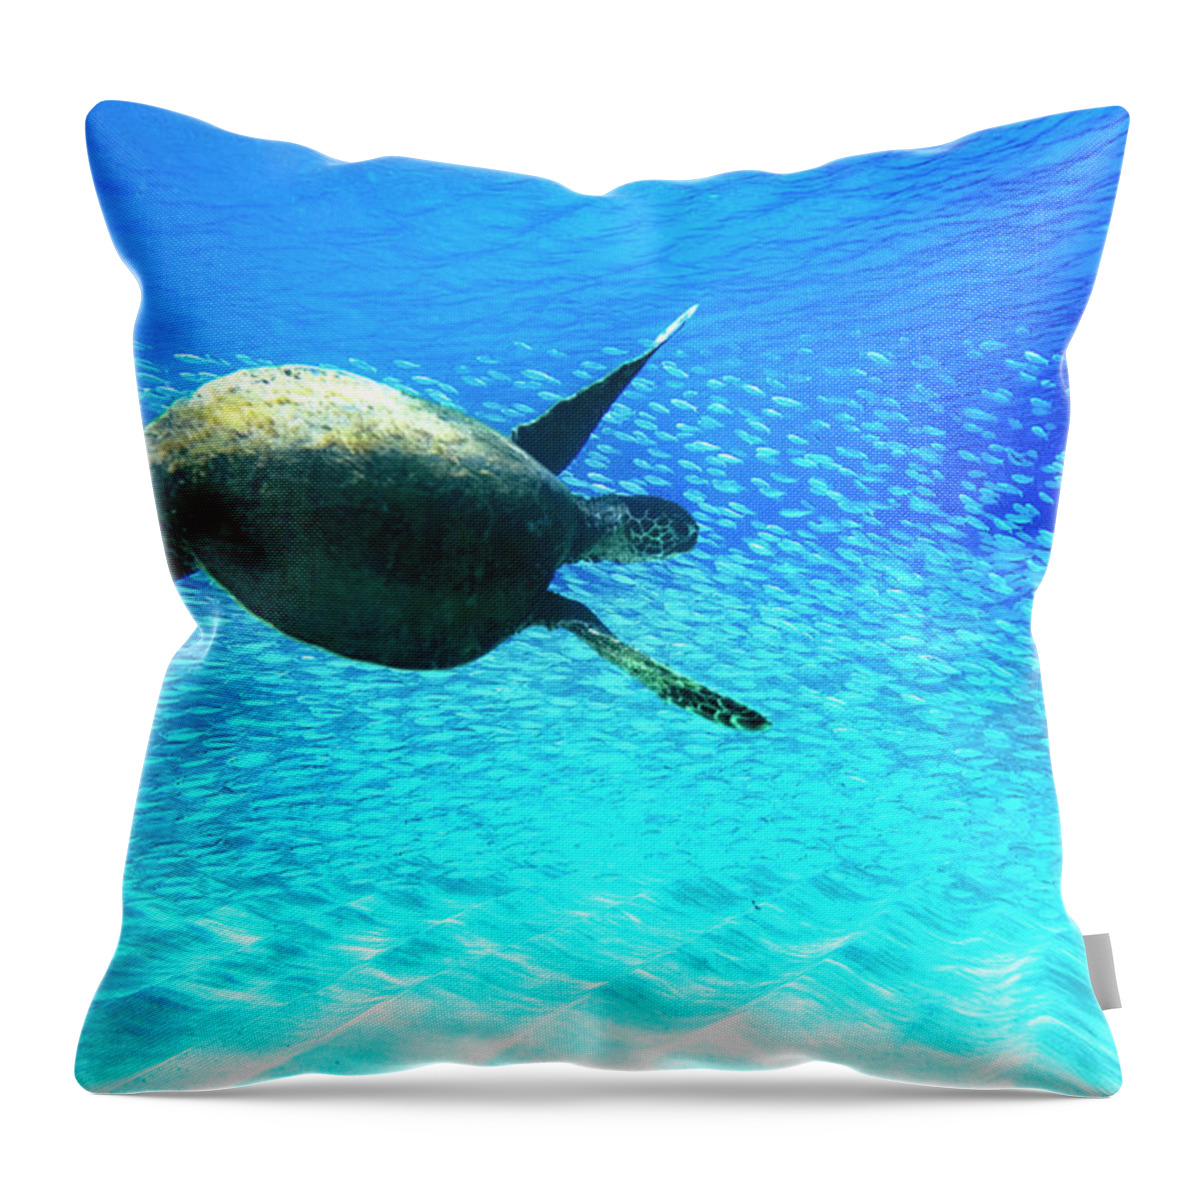 Sea Throw Pillow featuring the photograph Fish Swoop by Sean Davey